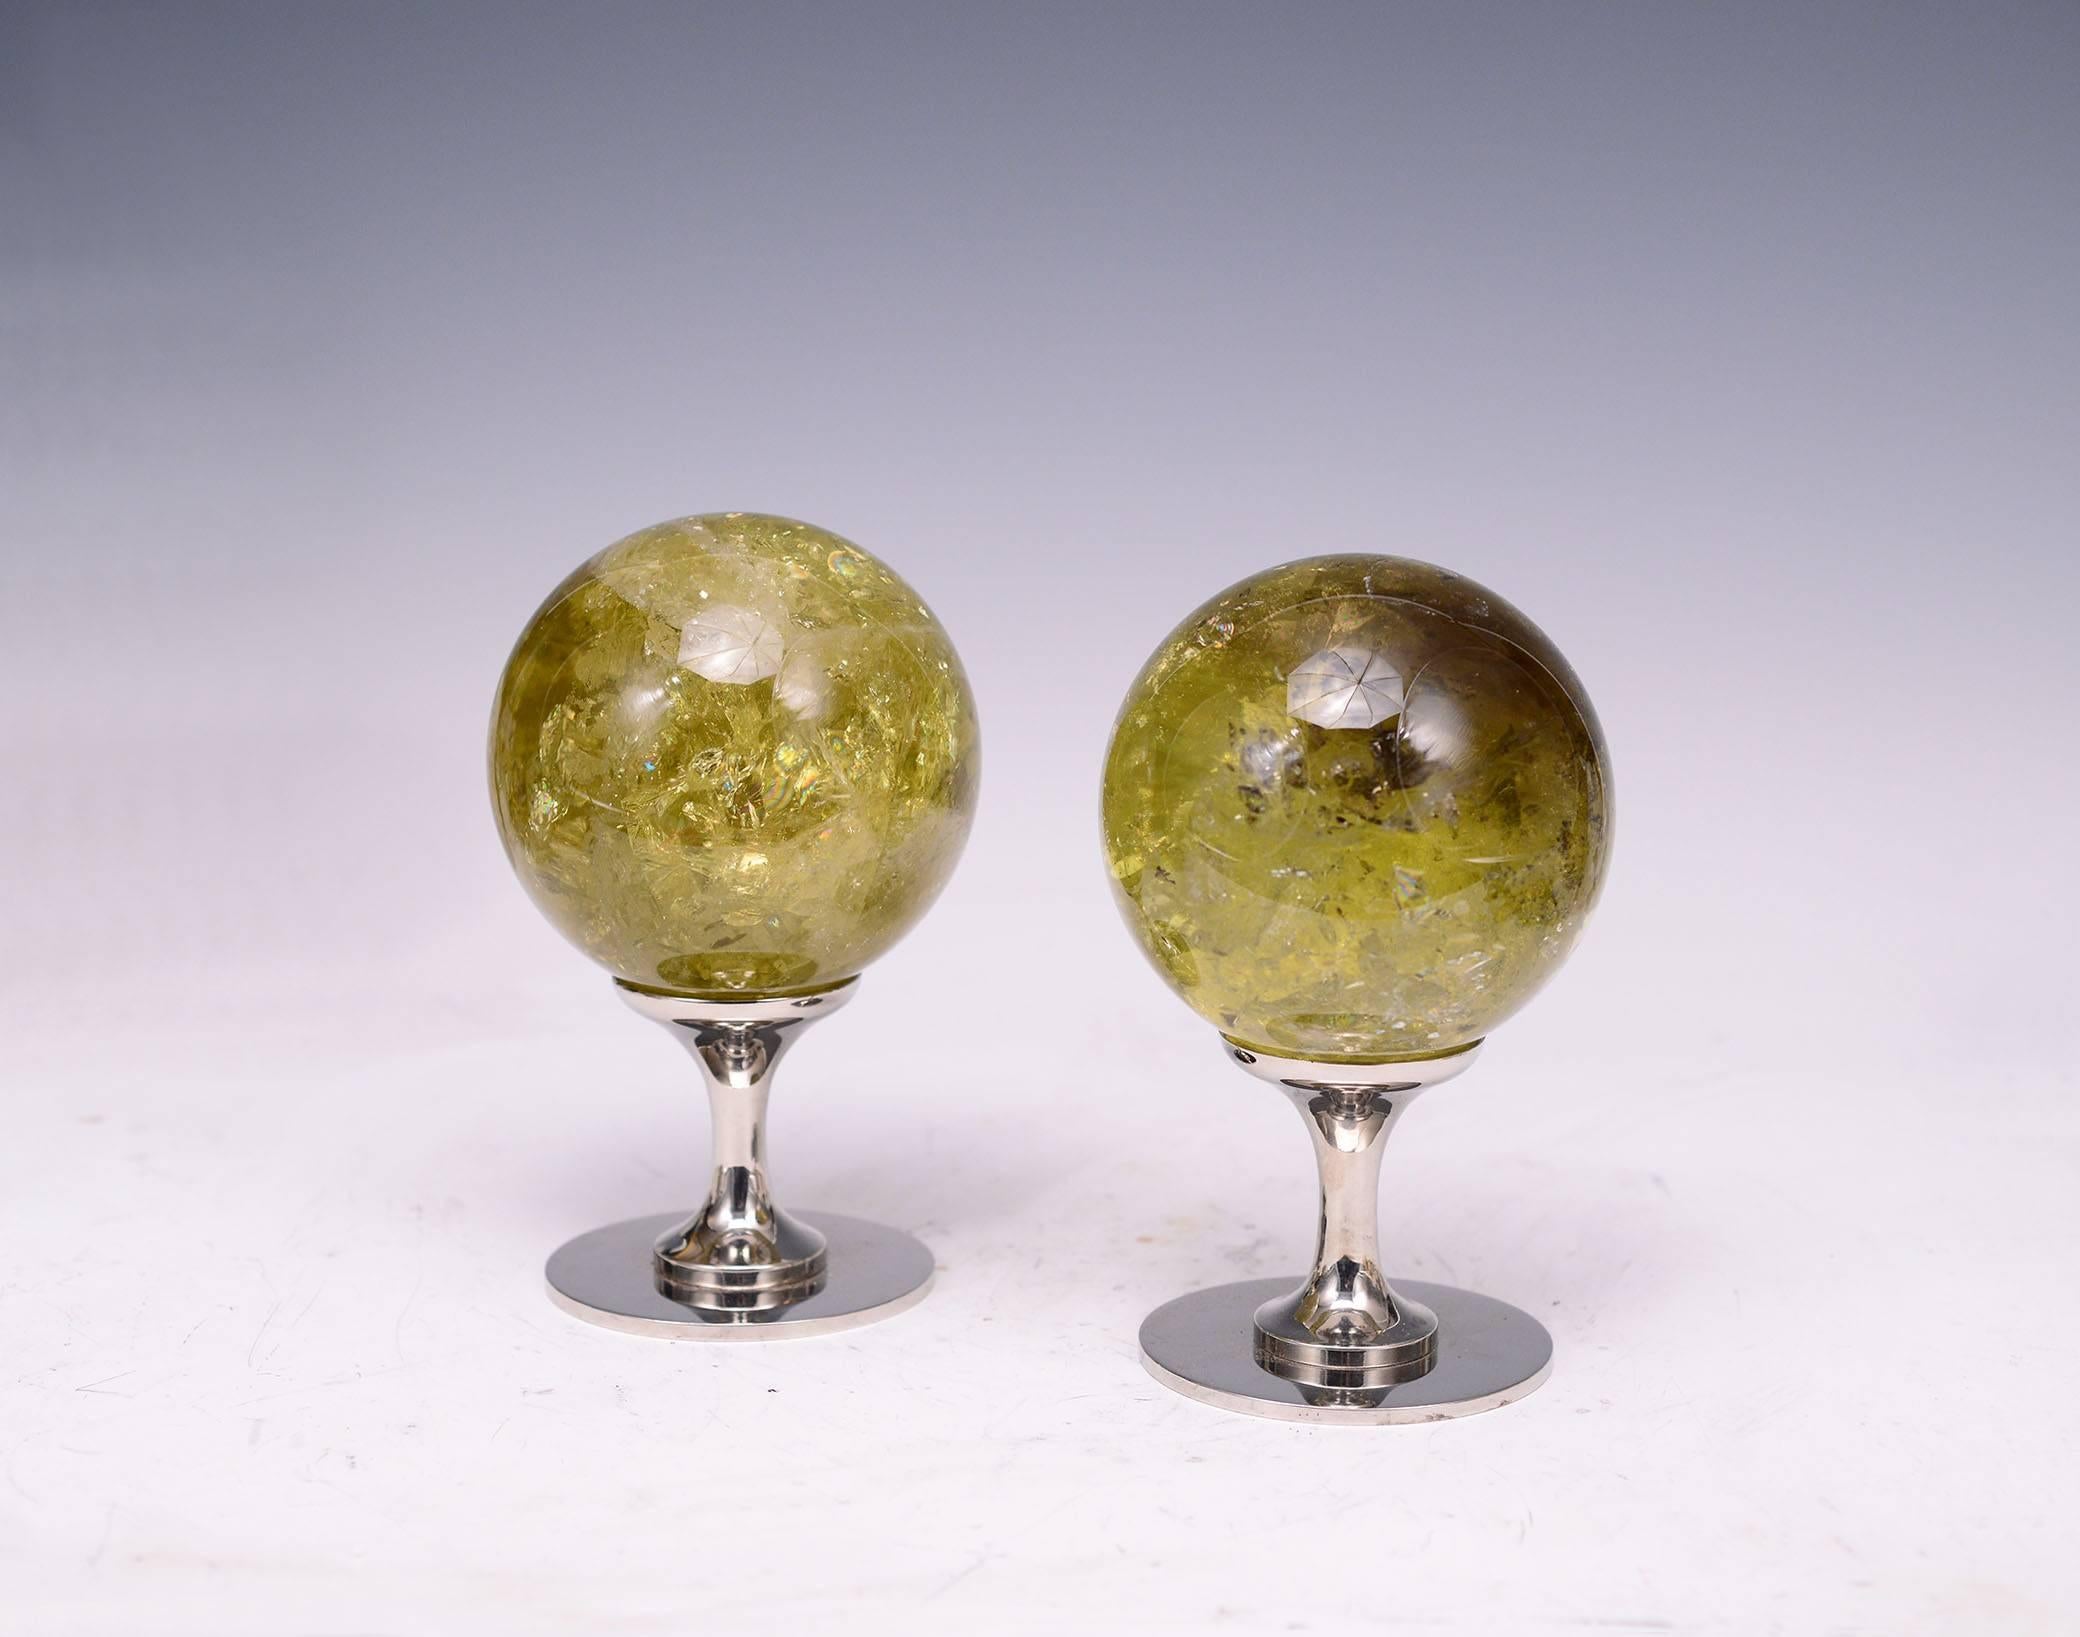 A group of two topaz rock crystal quartz balls with nickel plating bases, created by Phoenix Gallery, NYC.
Almost a pair.
Measure: (from left to right)
8.5